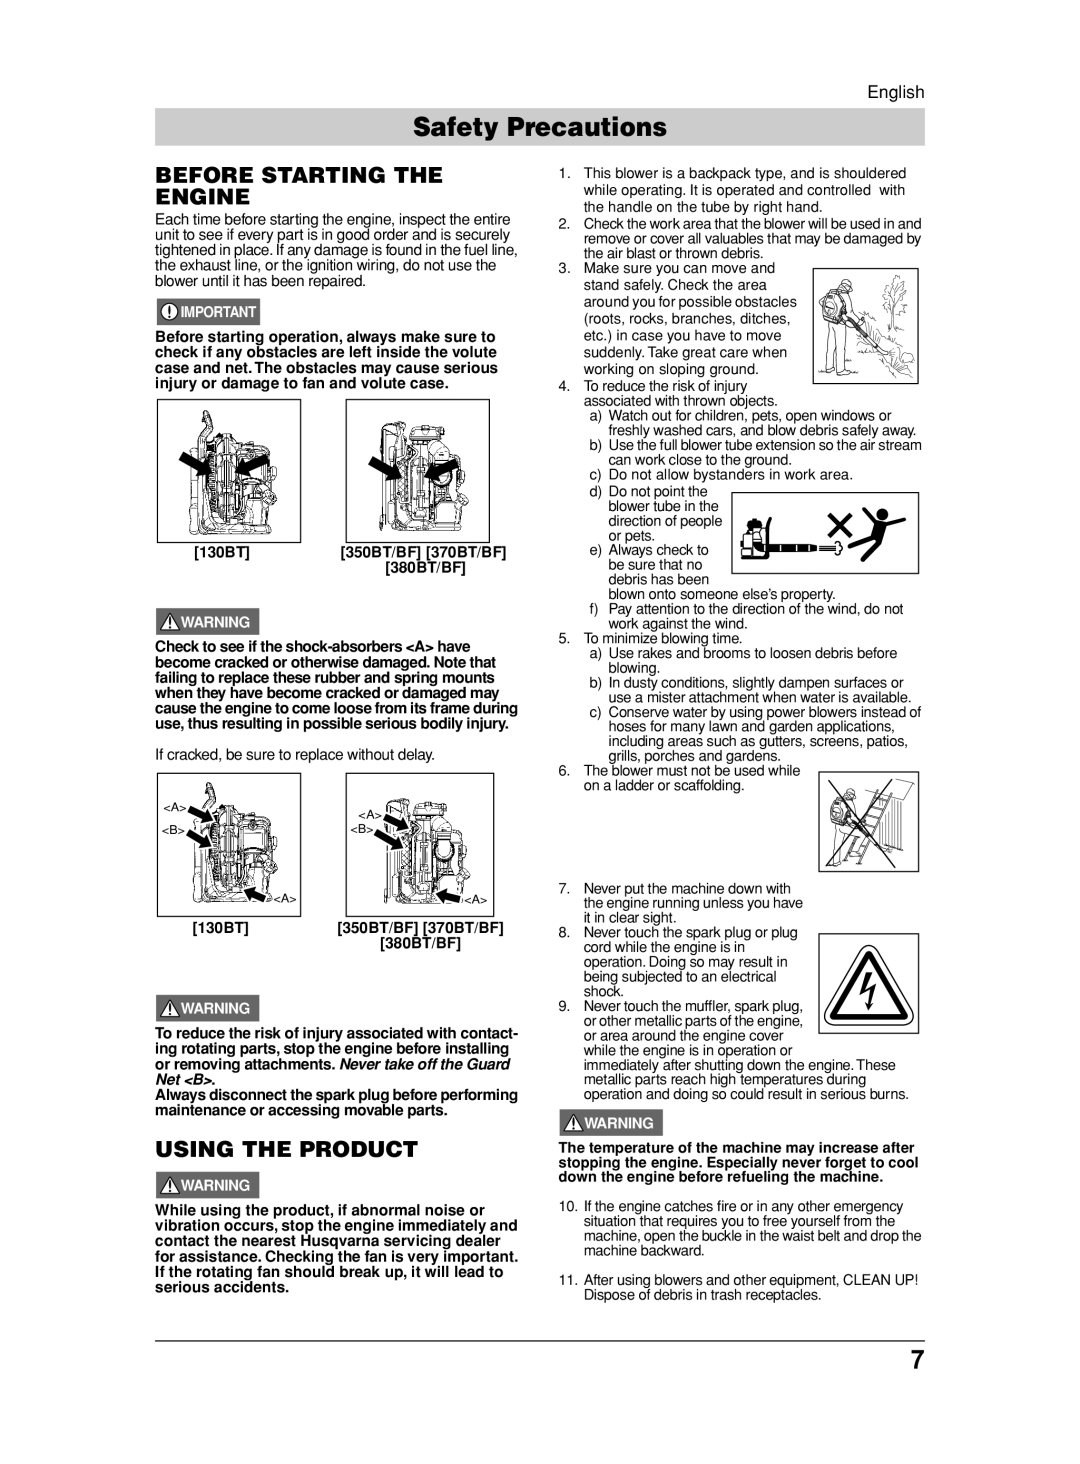 Husqvarna 130BT, 370BFS, 350BF, 115 31 90-95, 380BFS manual Safety Precautions, Before Starting The Engine, Using The Product 